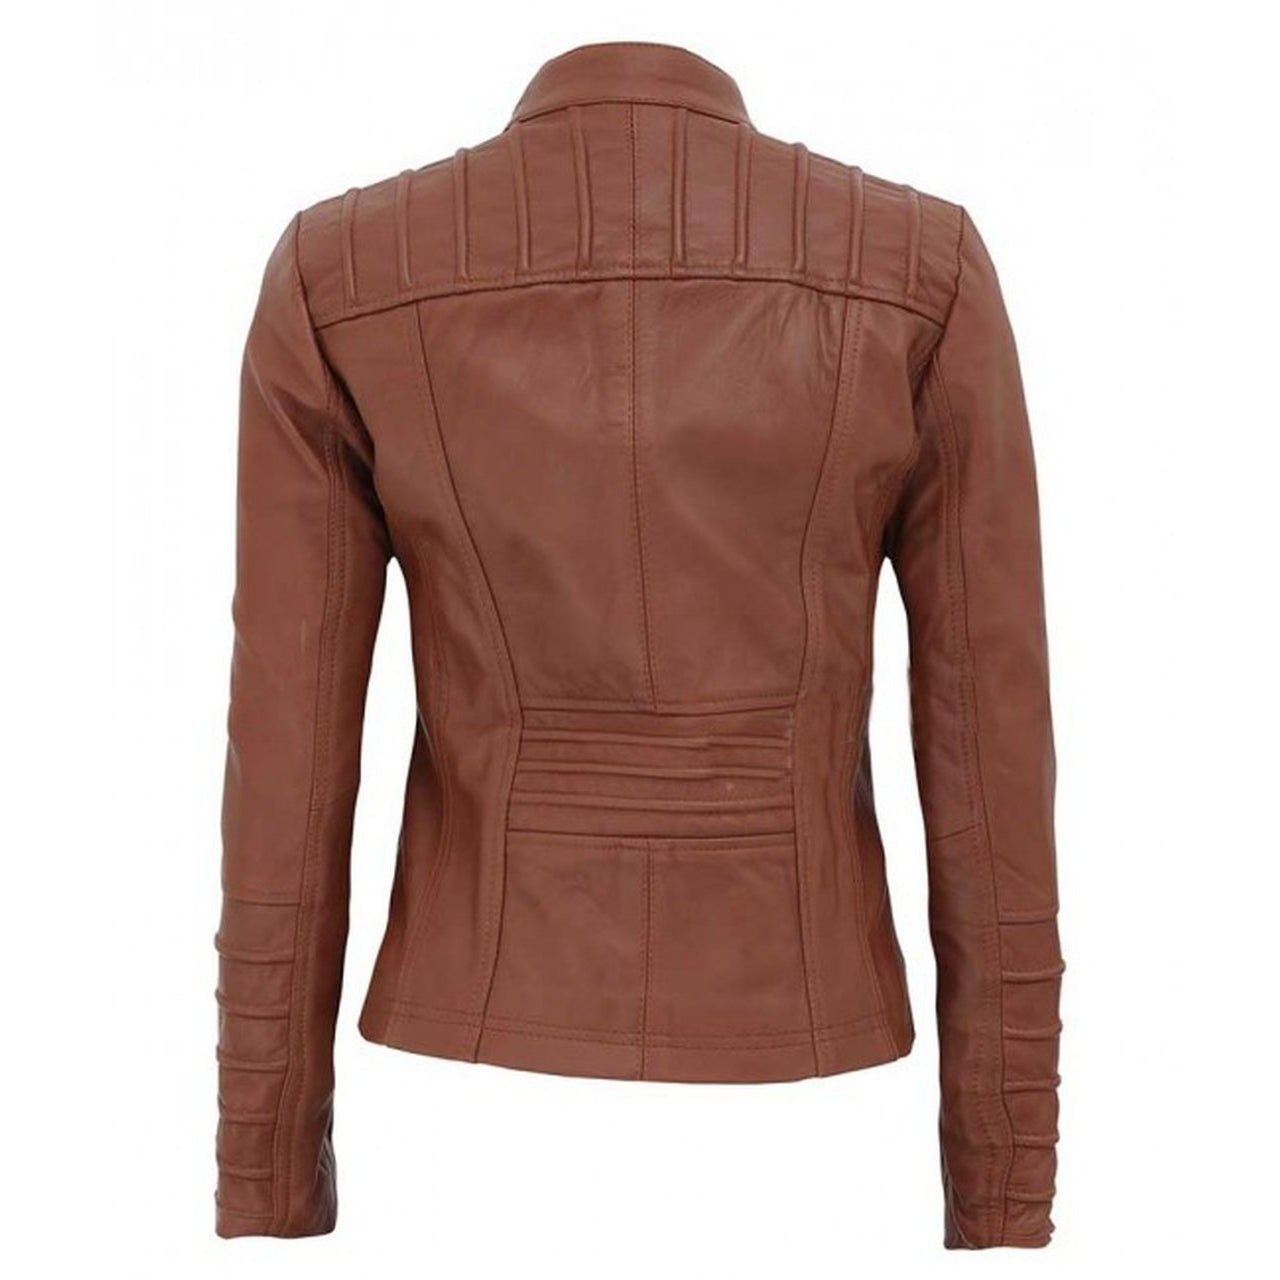 Women Tan Quilted Leather Biker Jacket - Leather Jacket